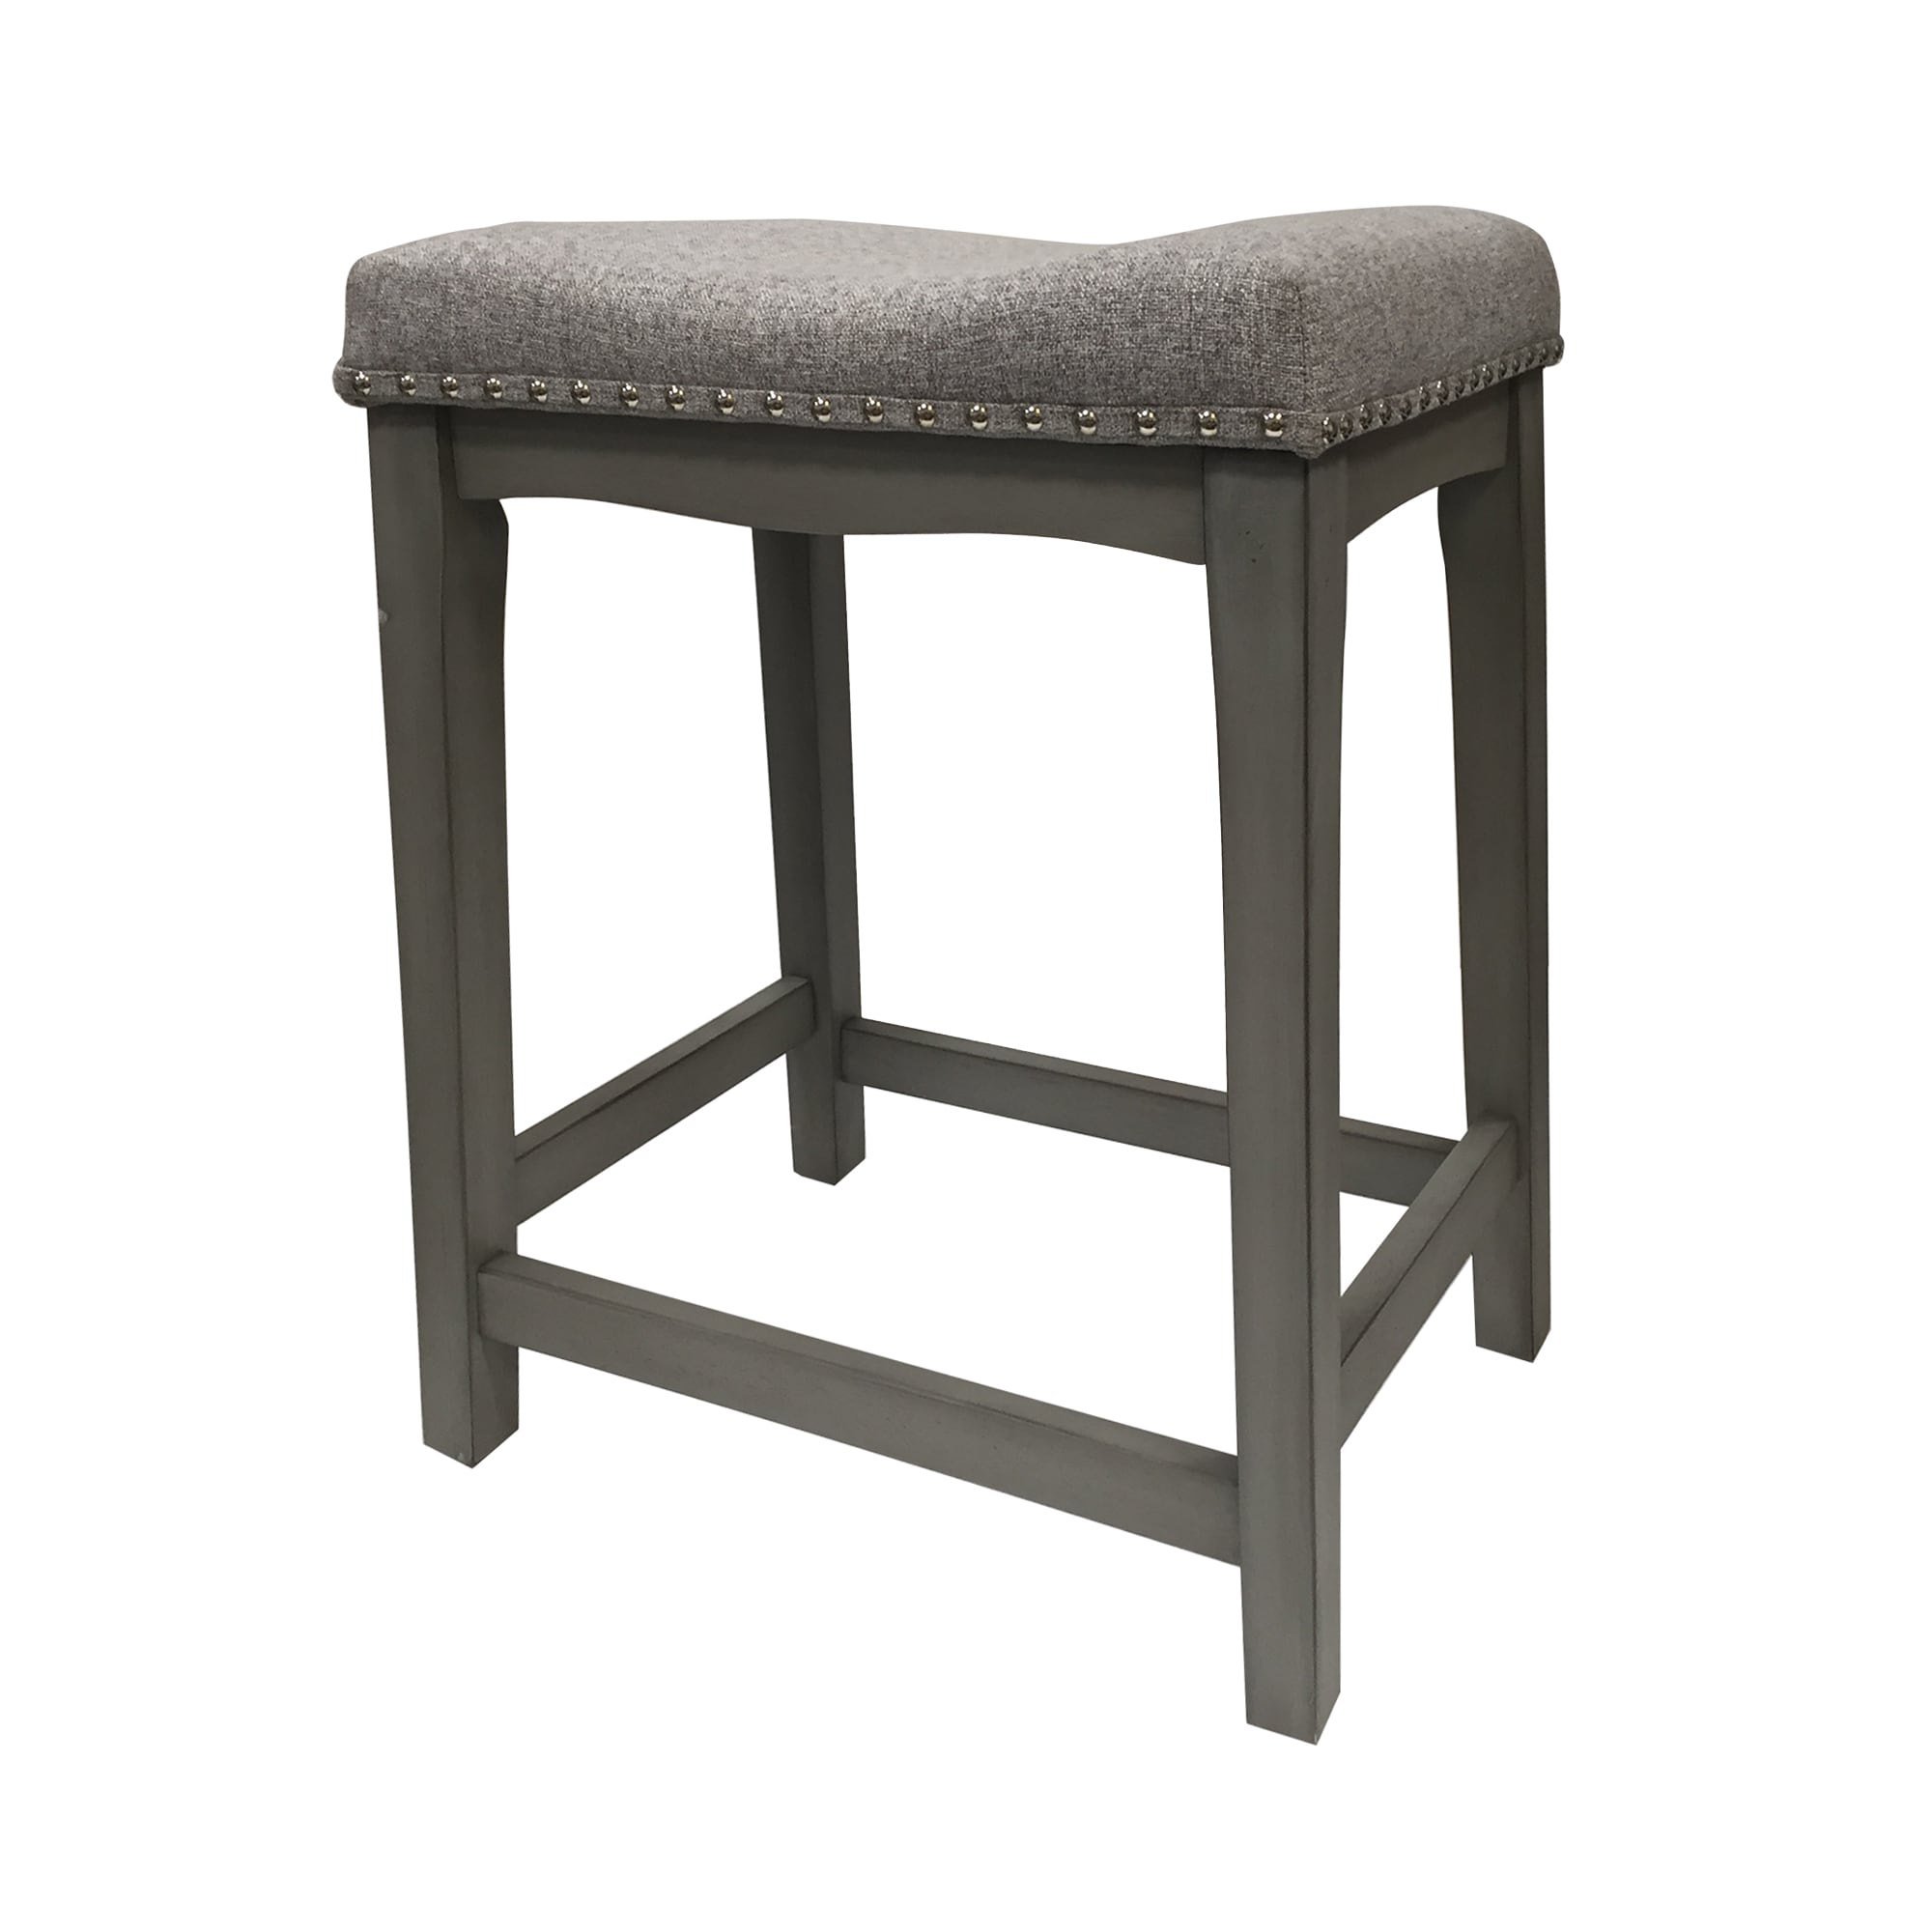 Upholstered Bar Stool In The Stools, What Size Bar Stool Do I Need For Counter Height